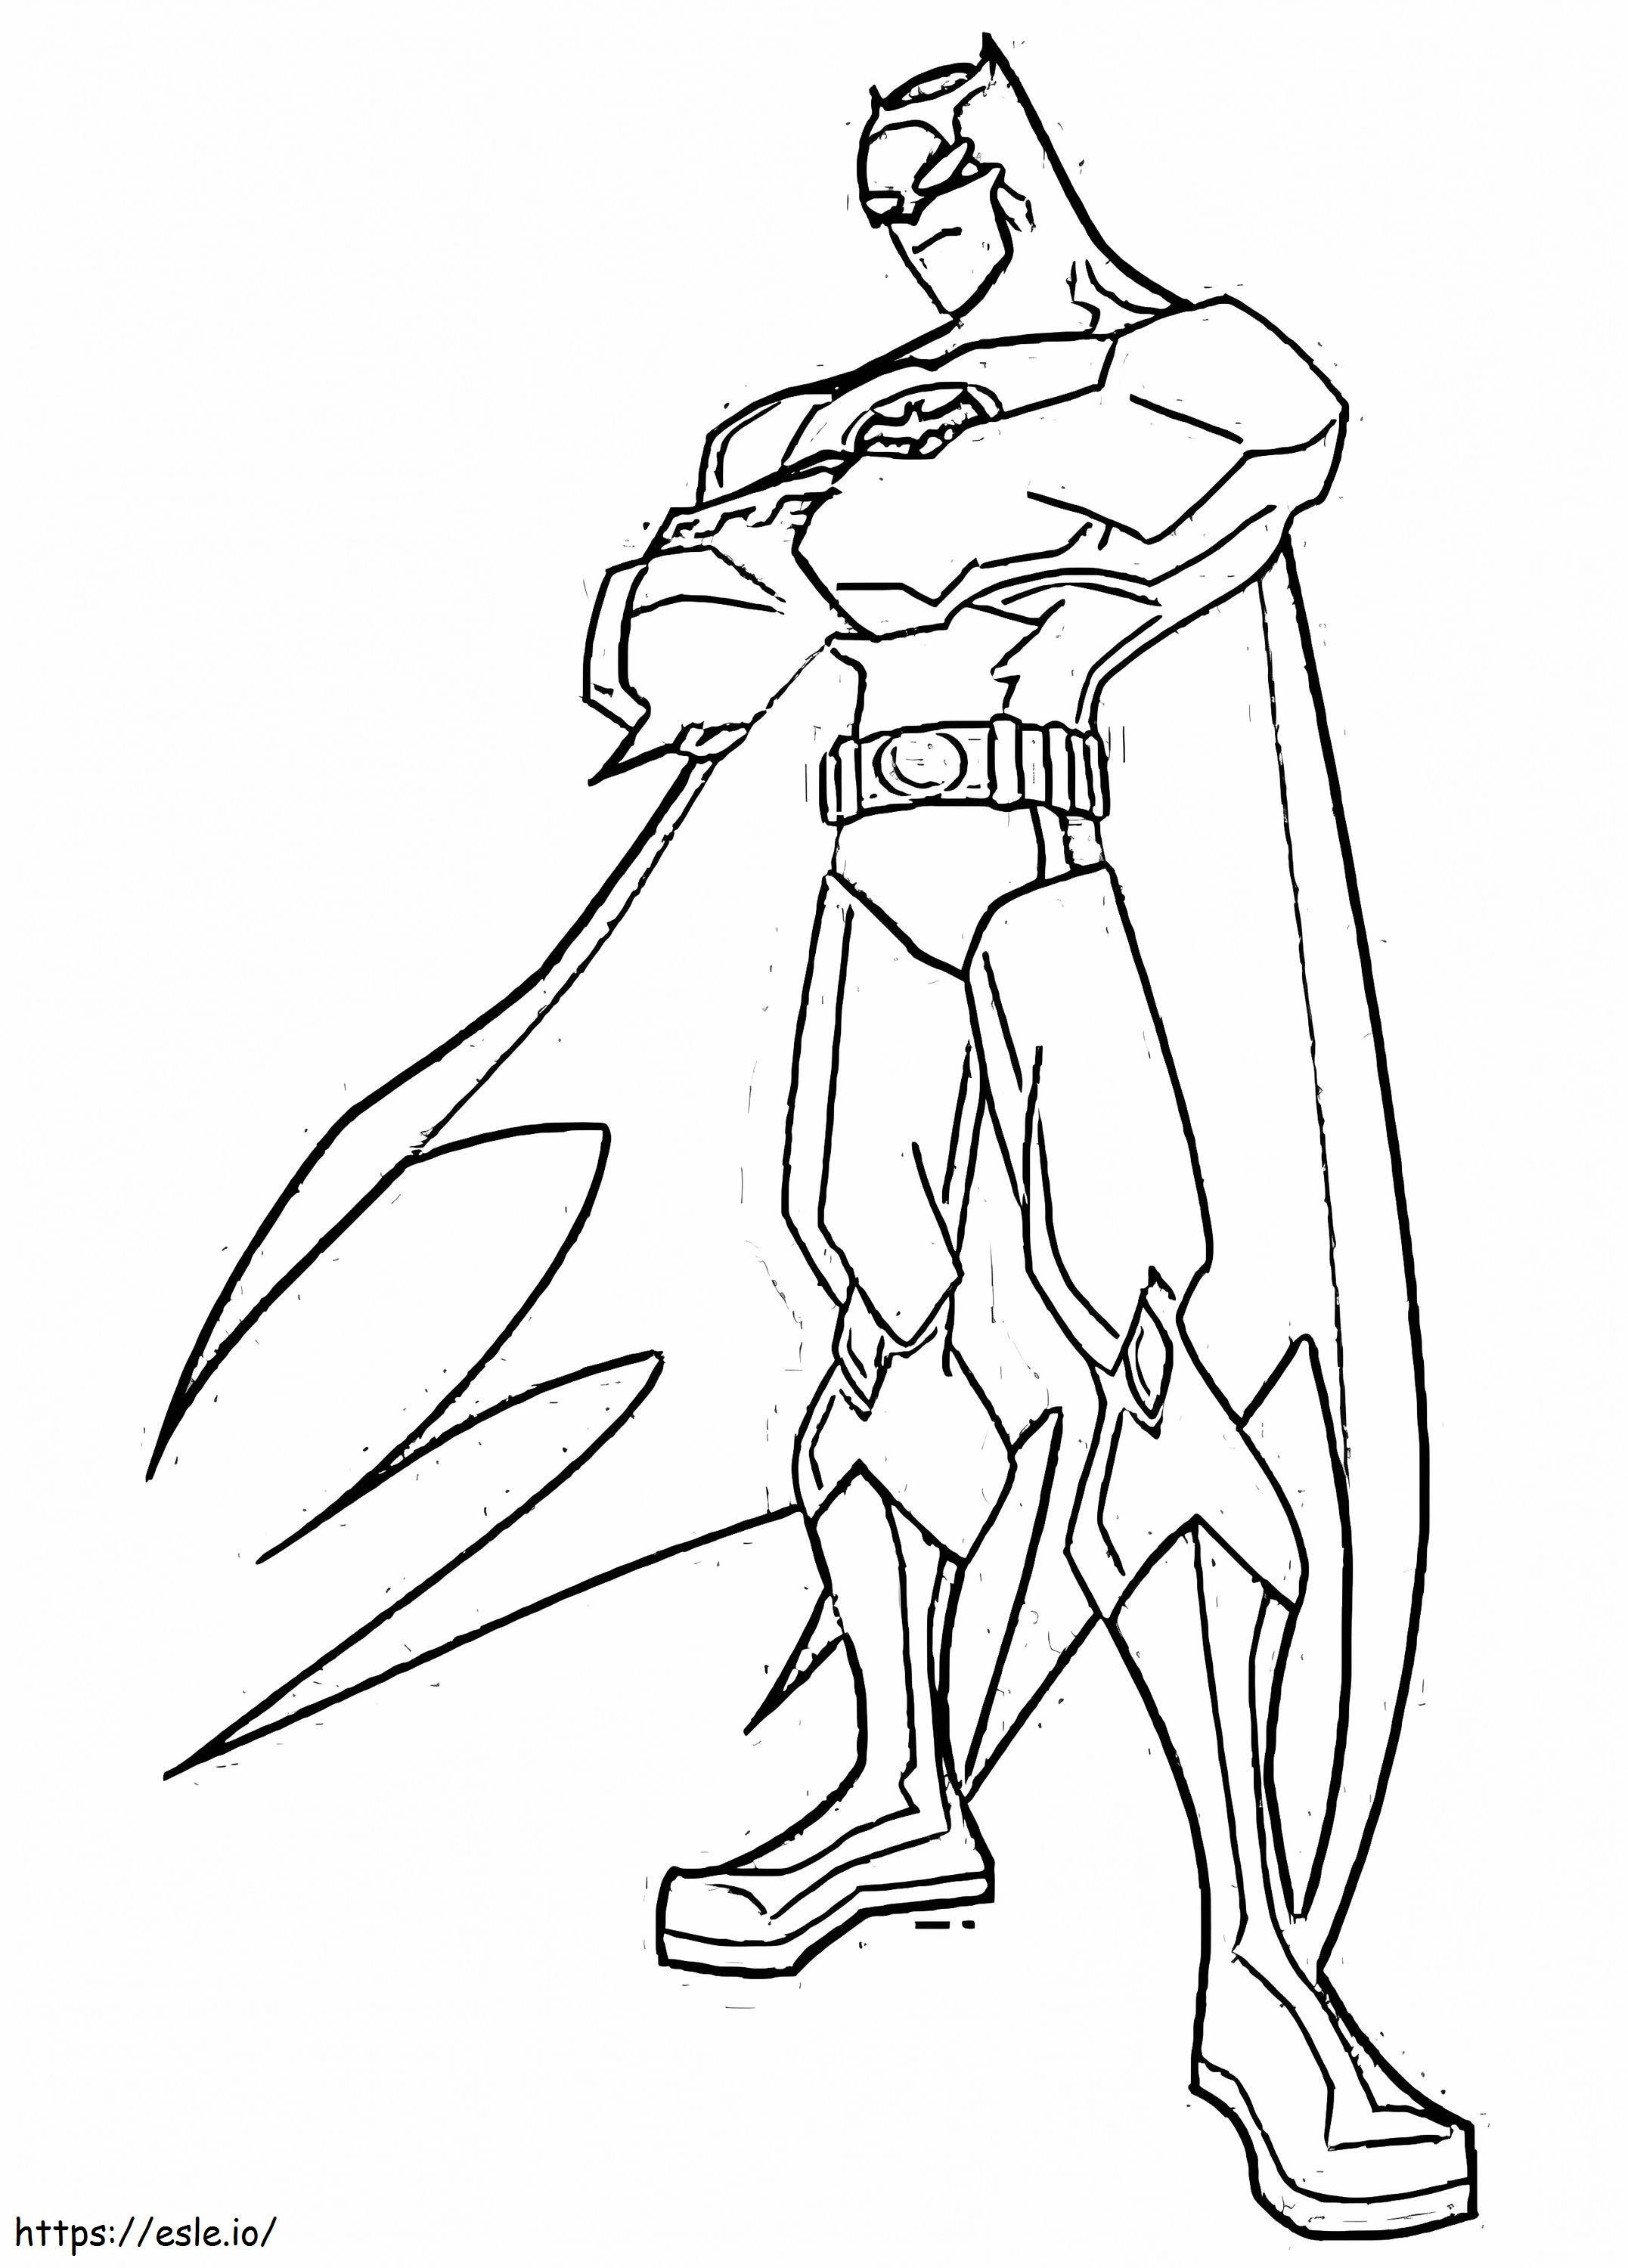 Animated Batman coloring page